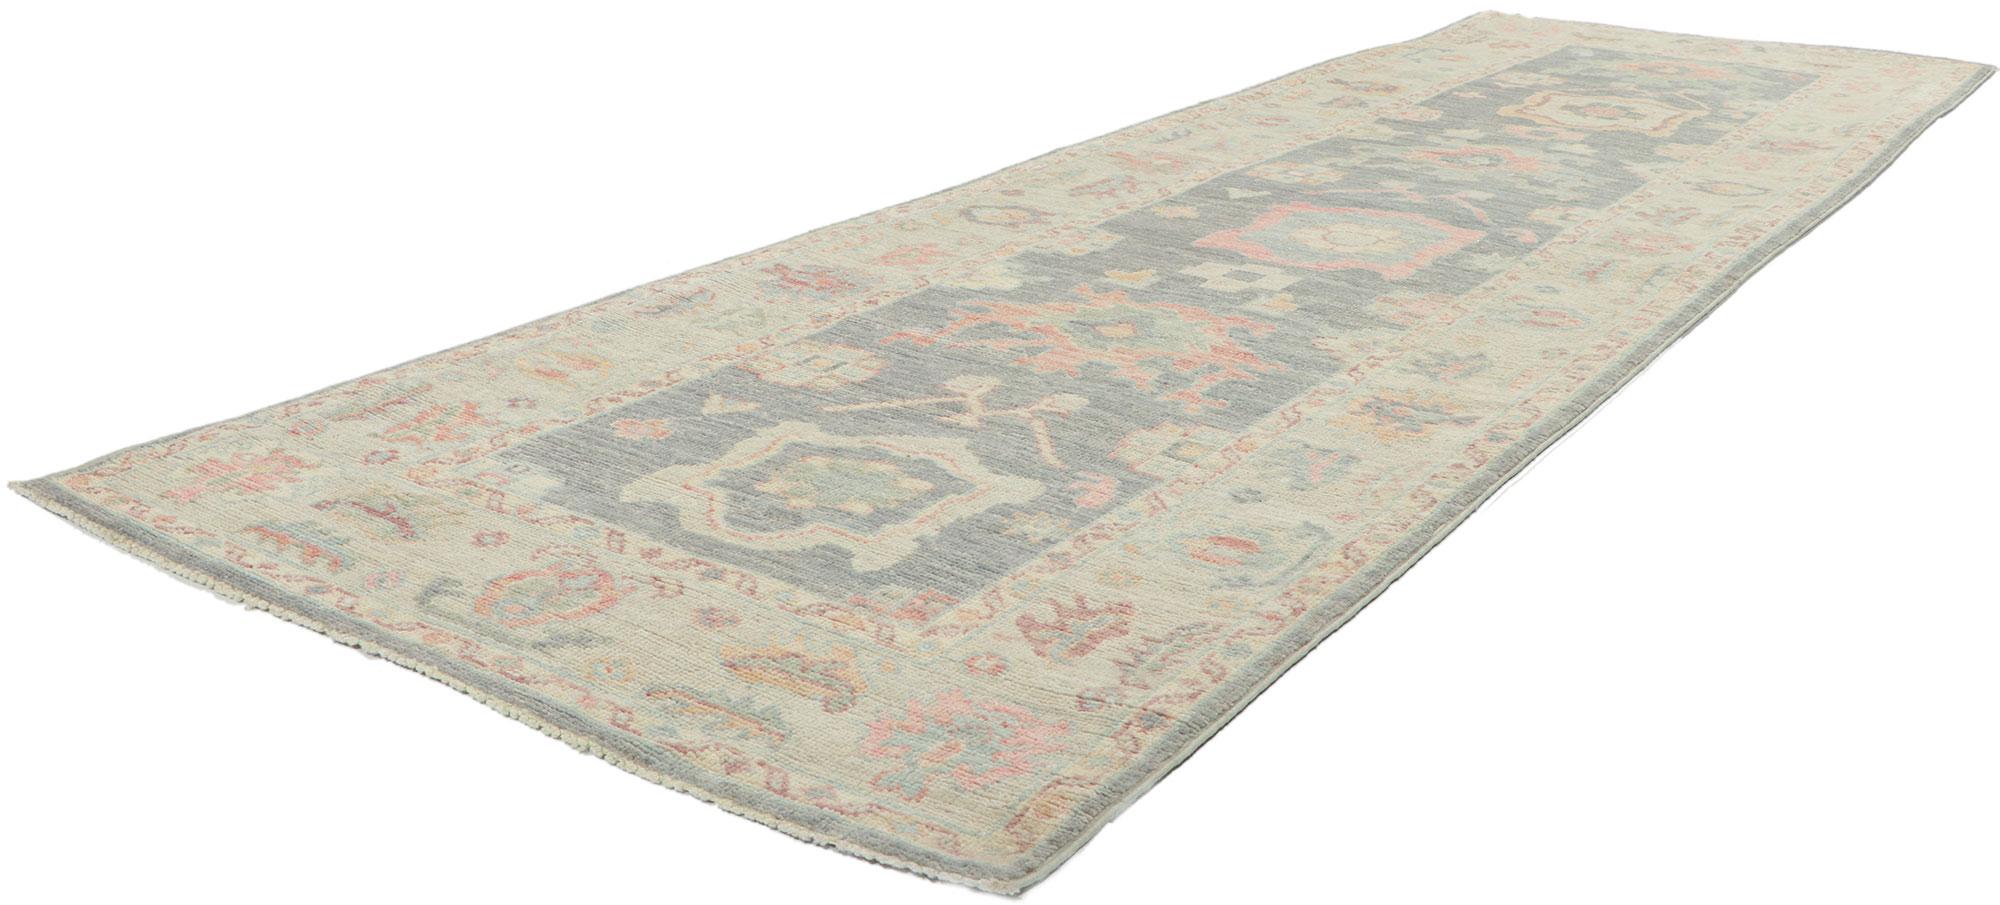 80860 New contemporary oushak runner with soft colors, 03'00 x 09'08. The classic style and soft colors are tranquil and sophisticated. With its timeless design and understated elegance, this versatile Oushak carpet runner will create a welcoming